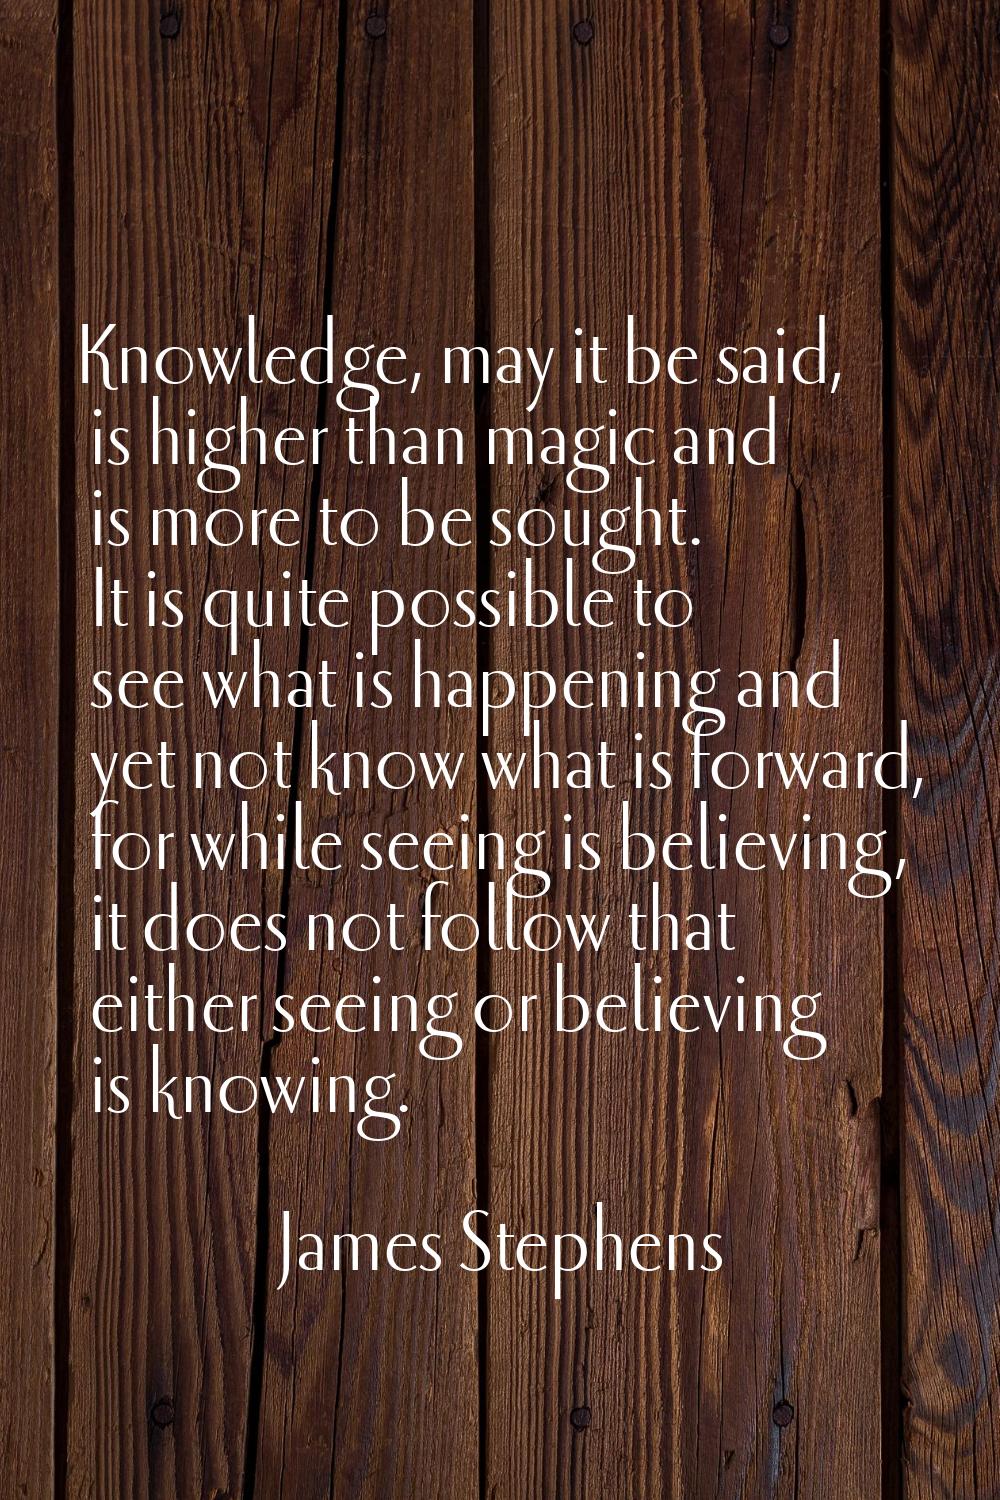 Knowledge, may it be said, is higher than magic and is more to be sought. It is quite possible to s